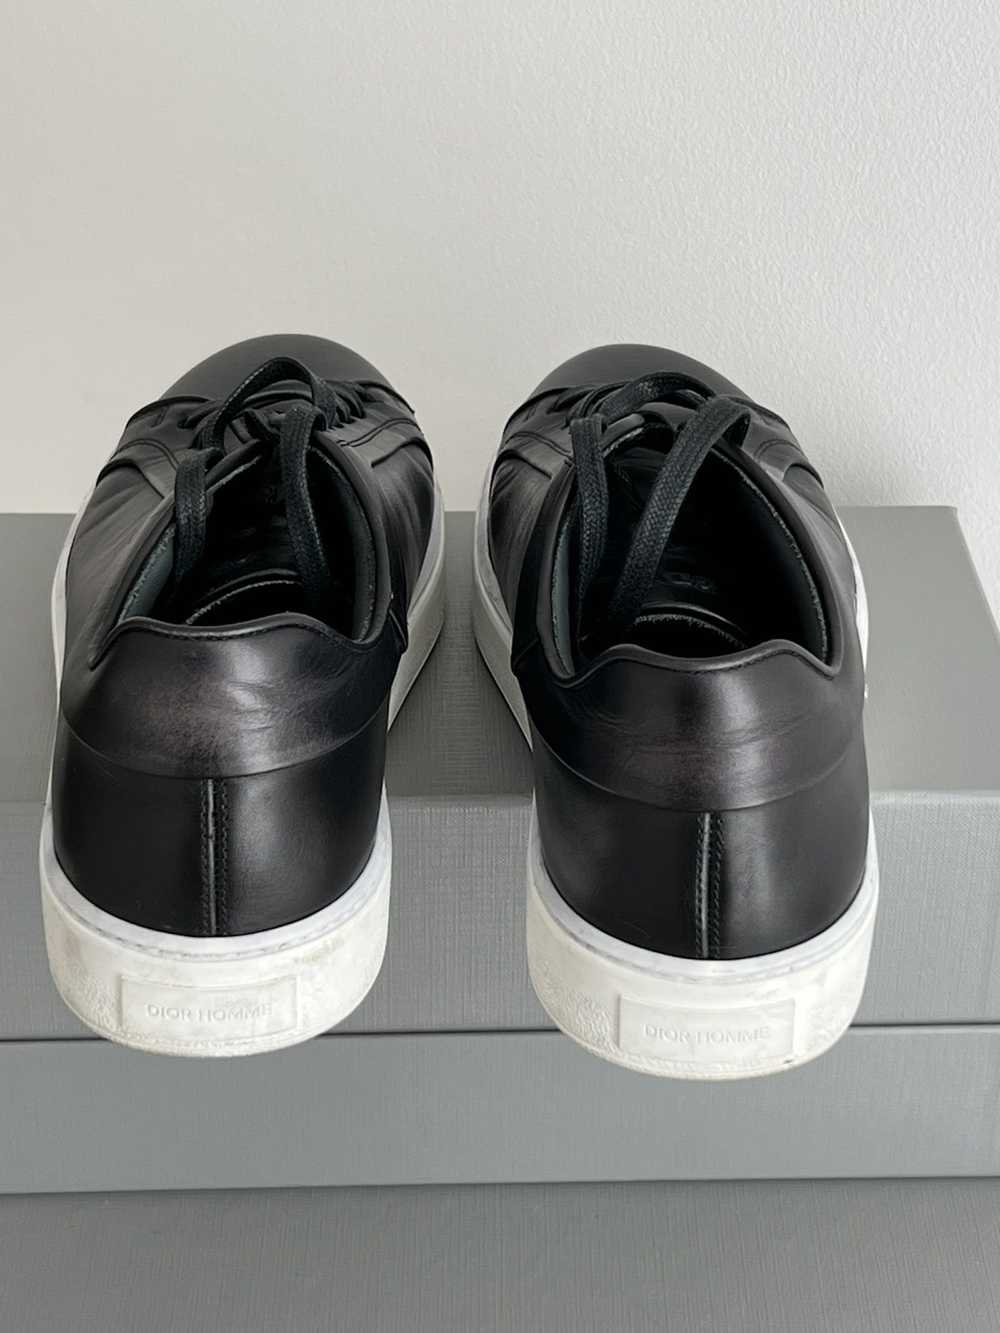 Dior Basic Dior Homme black & white sneakers - image 4